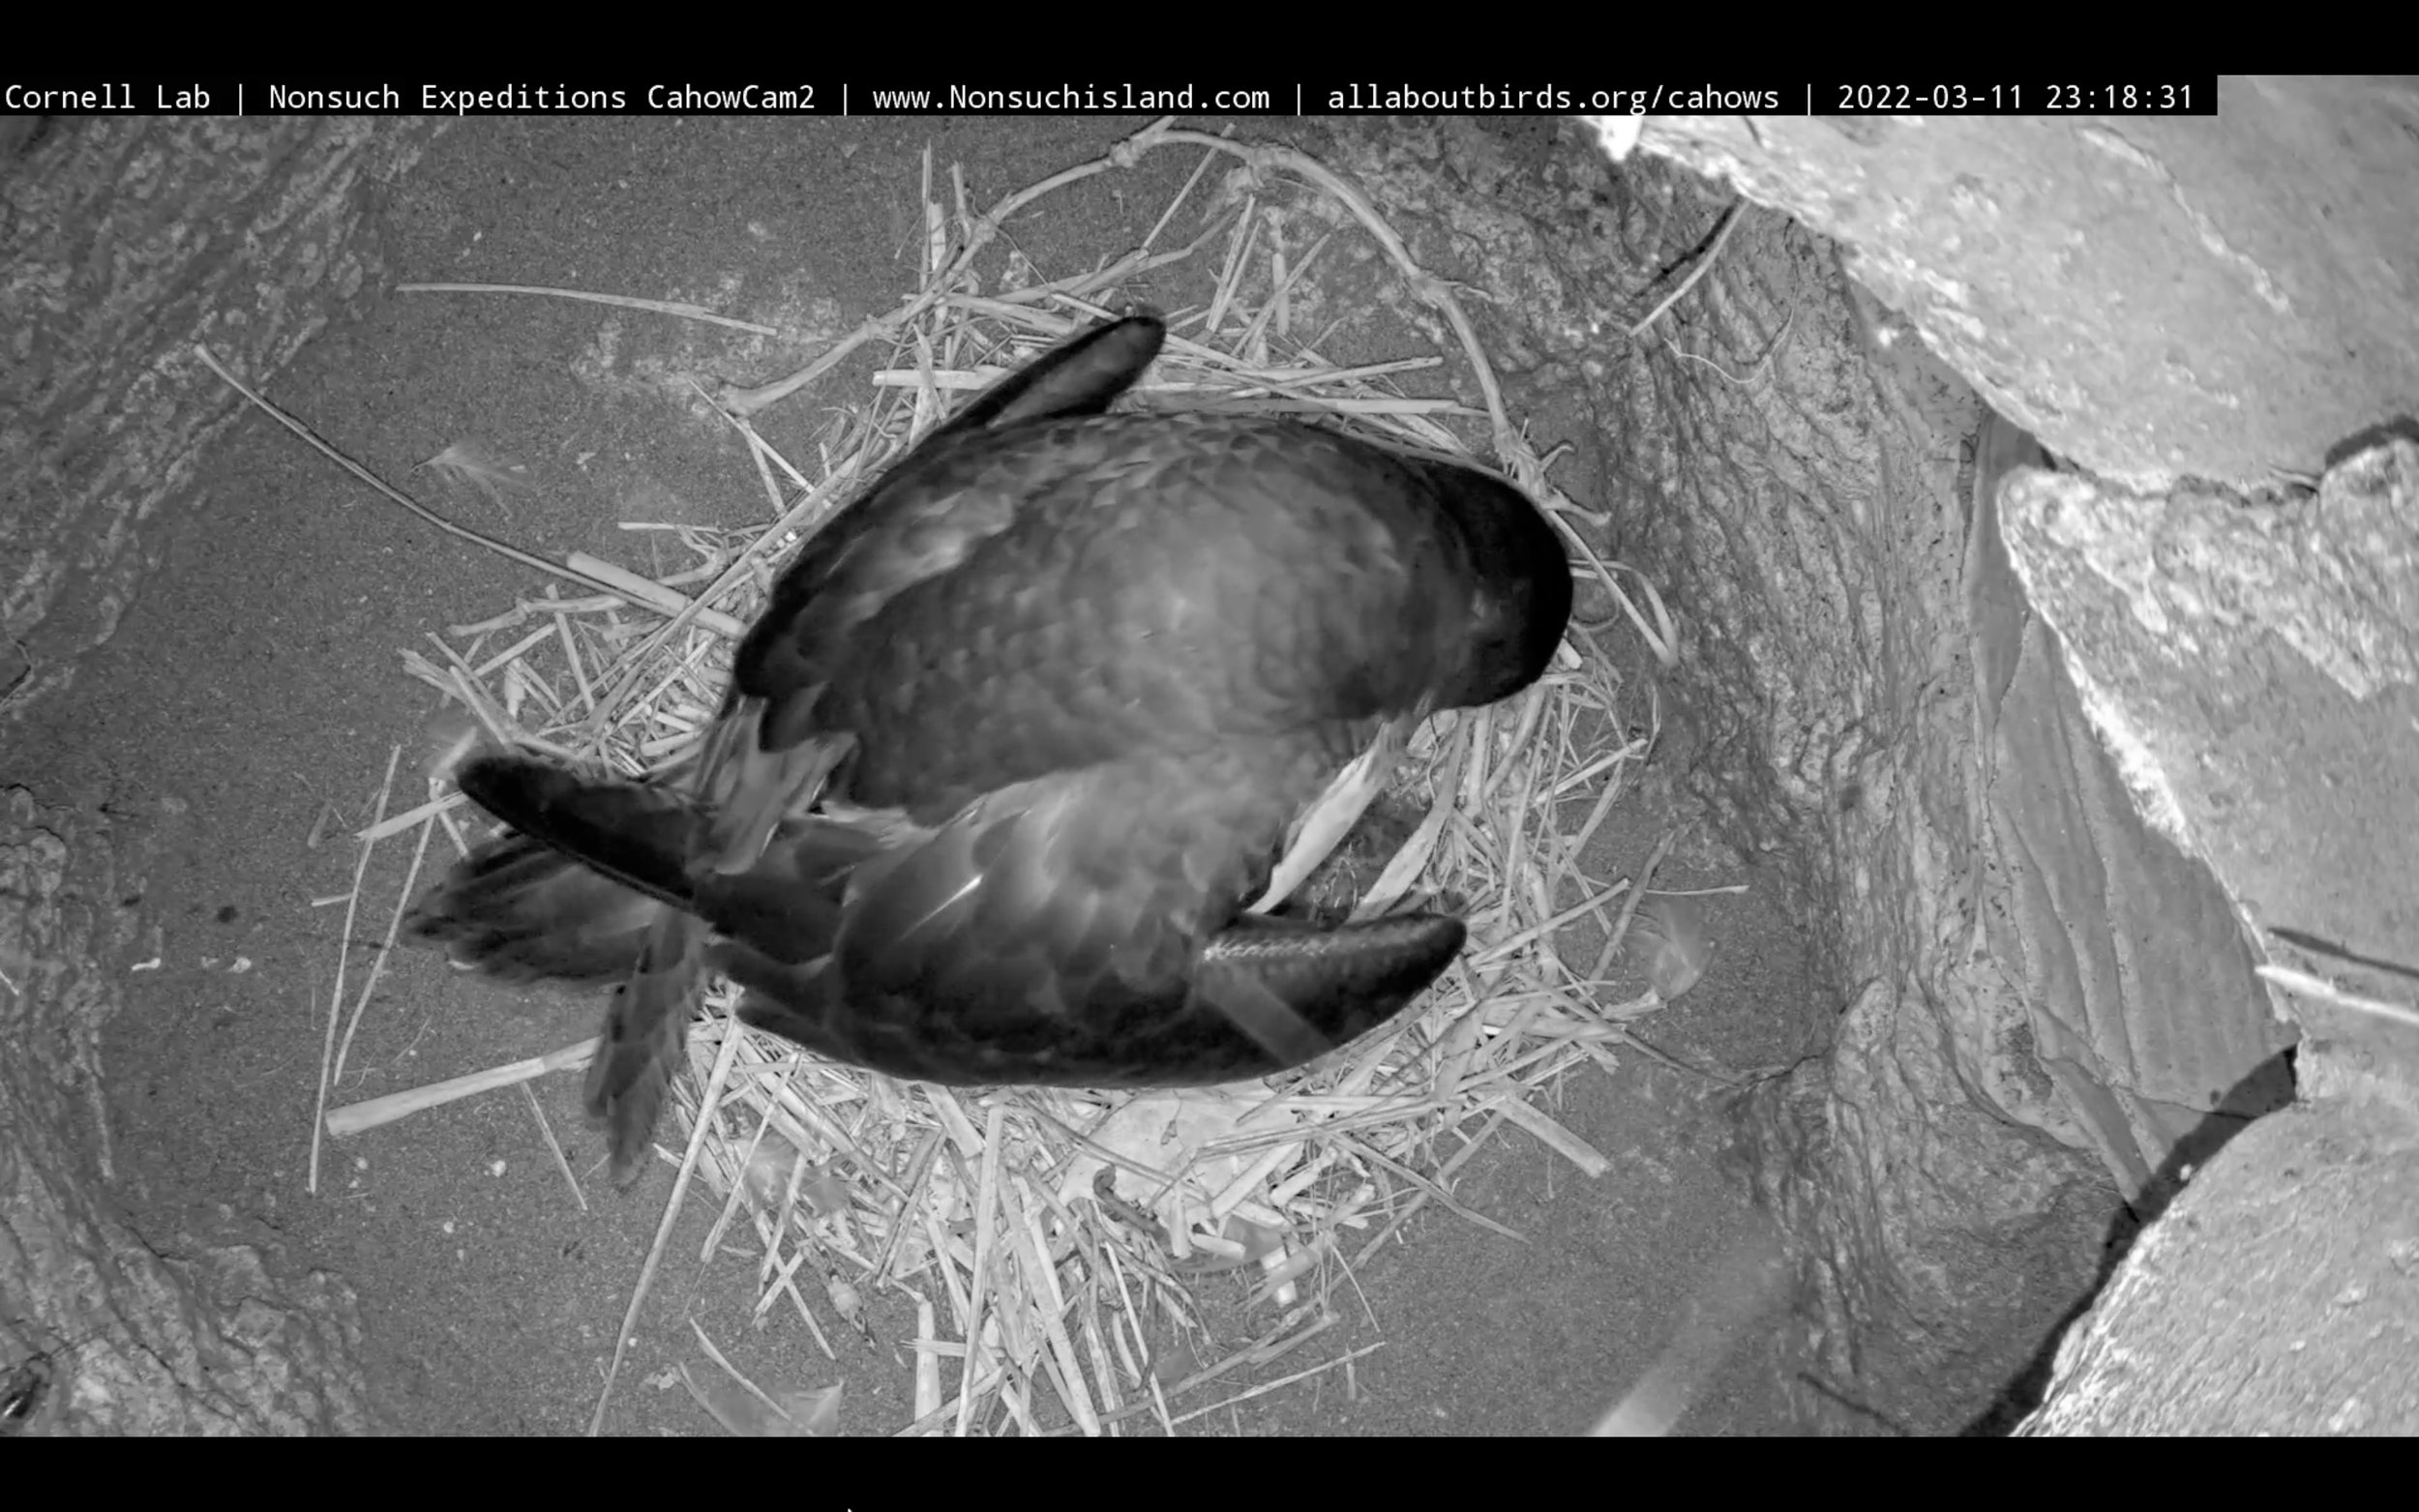 March 11th @23:18 &gt; Chick revealed under wing